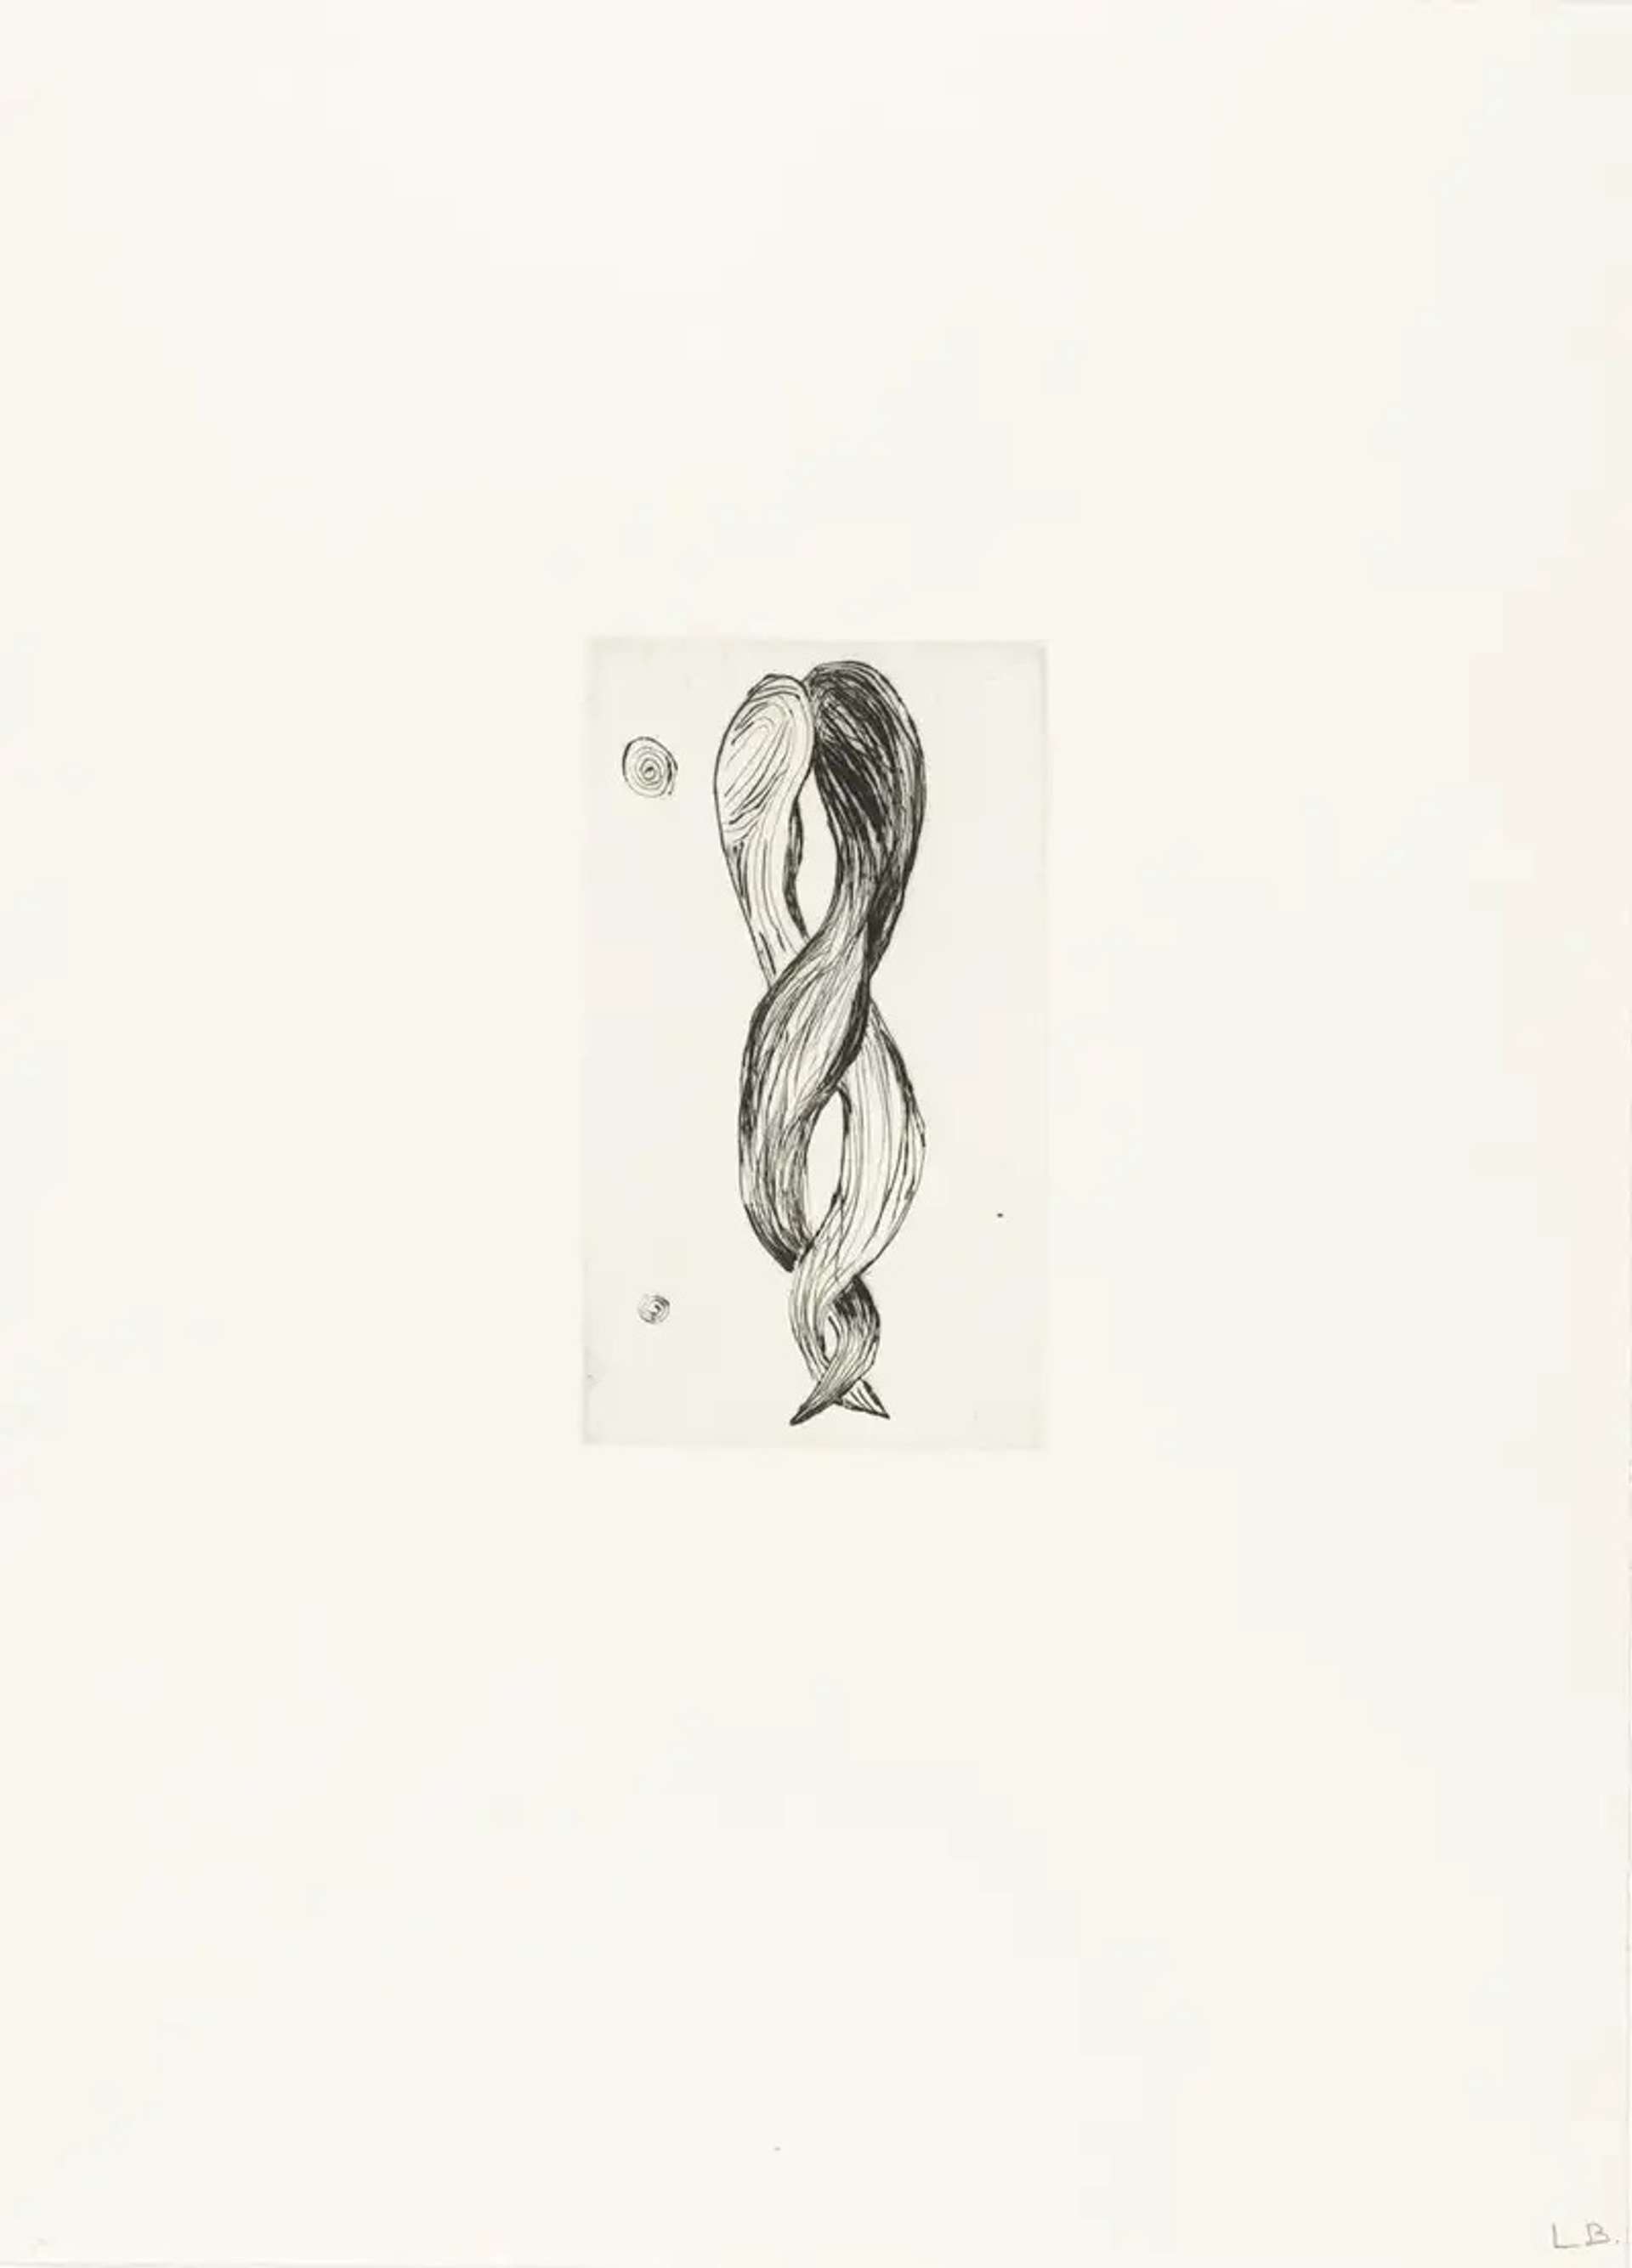 Louise Bourgeois Untitled No. 3. A monochromatic etching of an anatomical depiction of braided hair. 